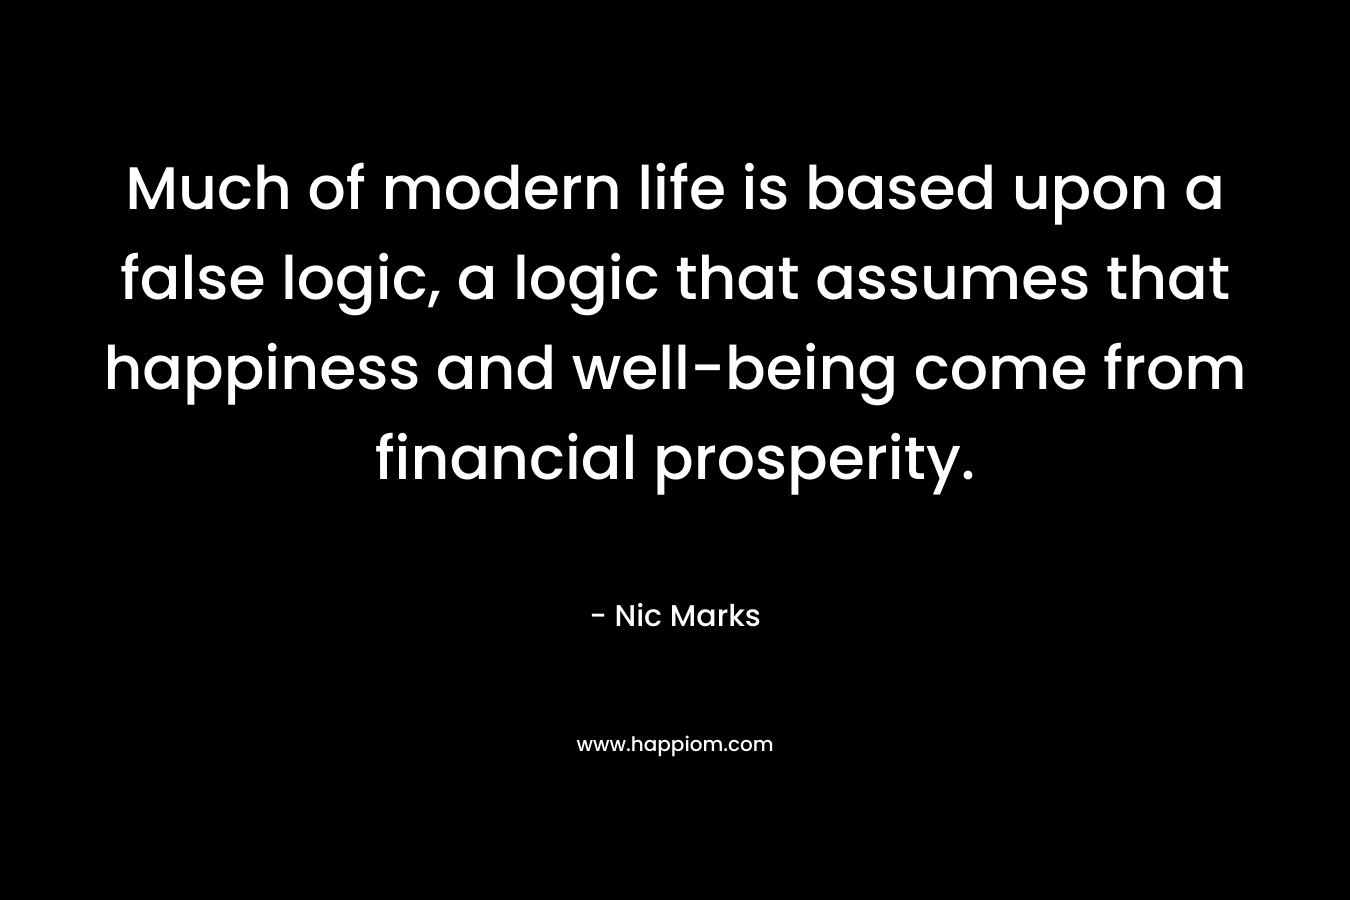 Much of modern life is based upon a false logic, a logic that assumes that happiness and well-being come from financial prosperity. – Nic Marks